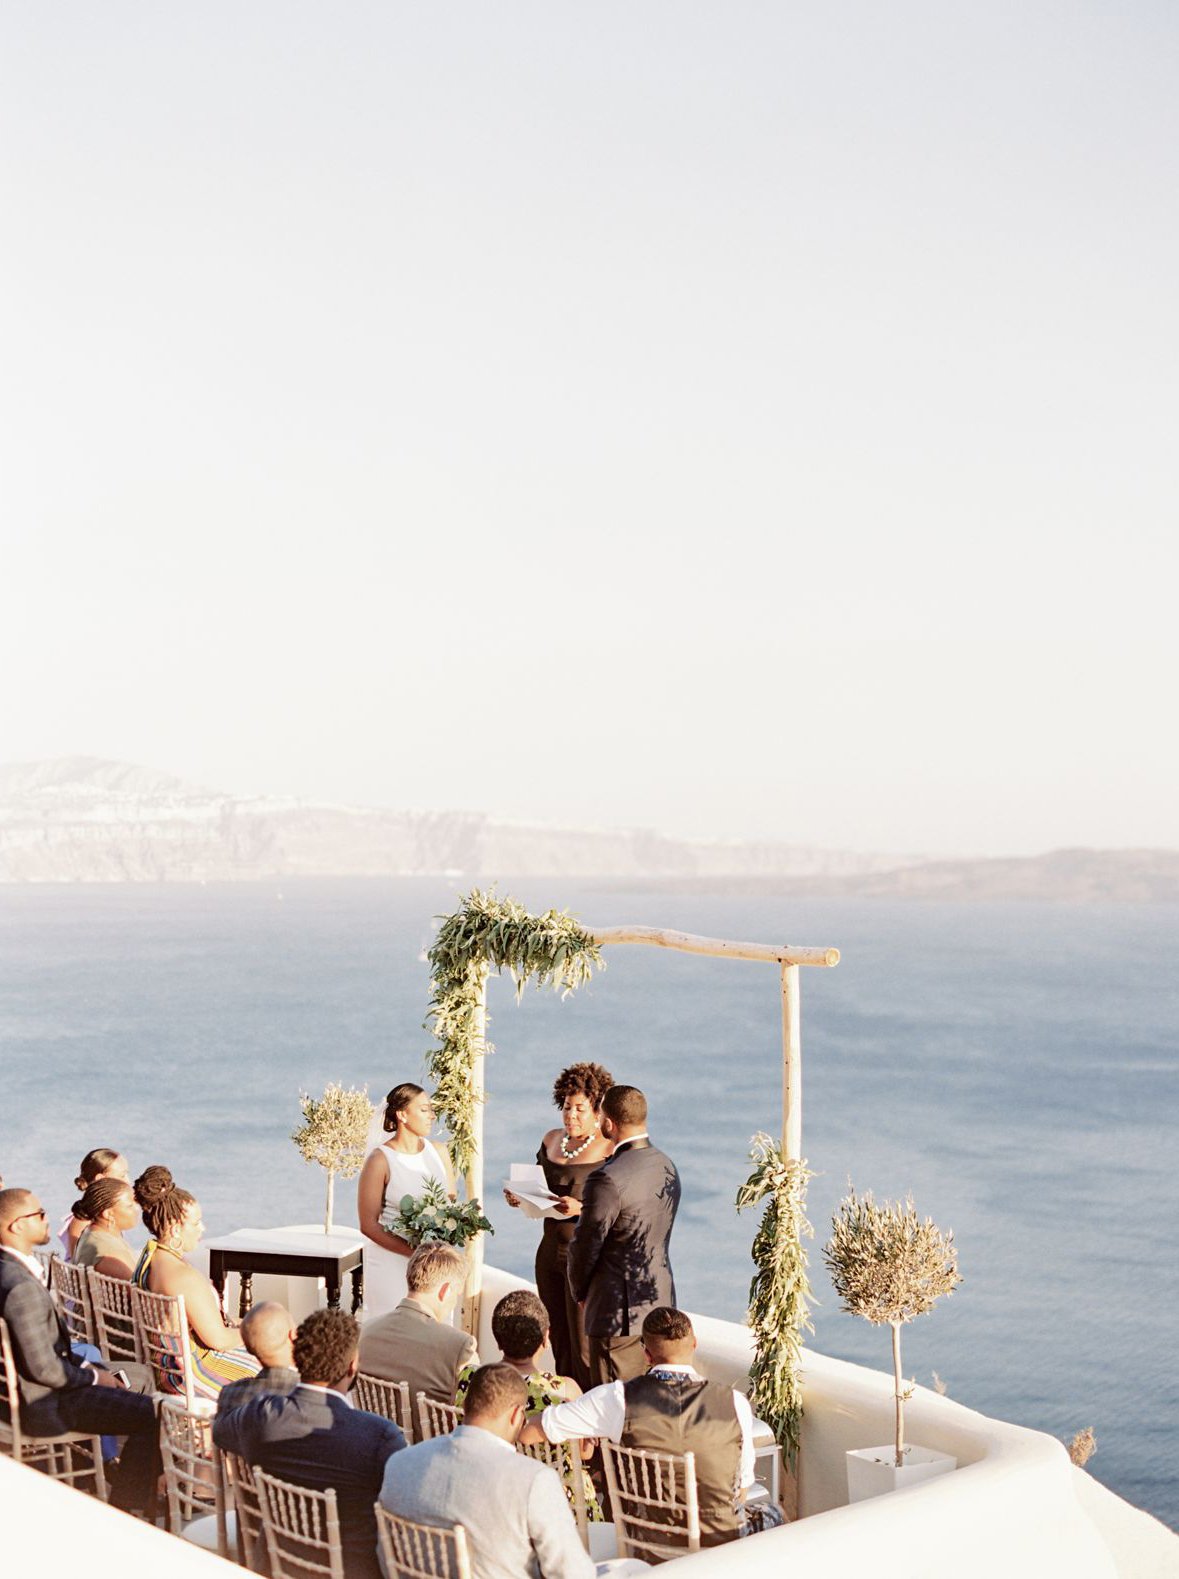 Wedding ceremony for elopement at Canaves Oia, Santorini